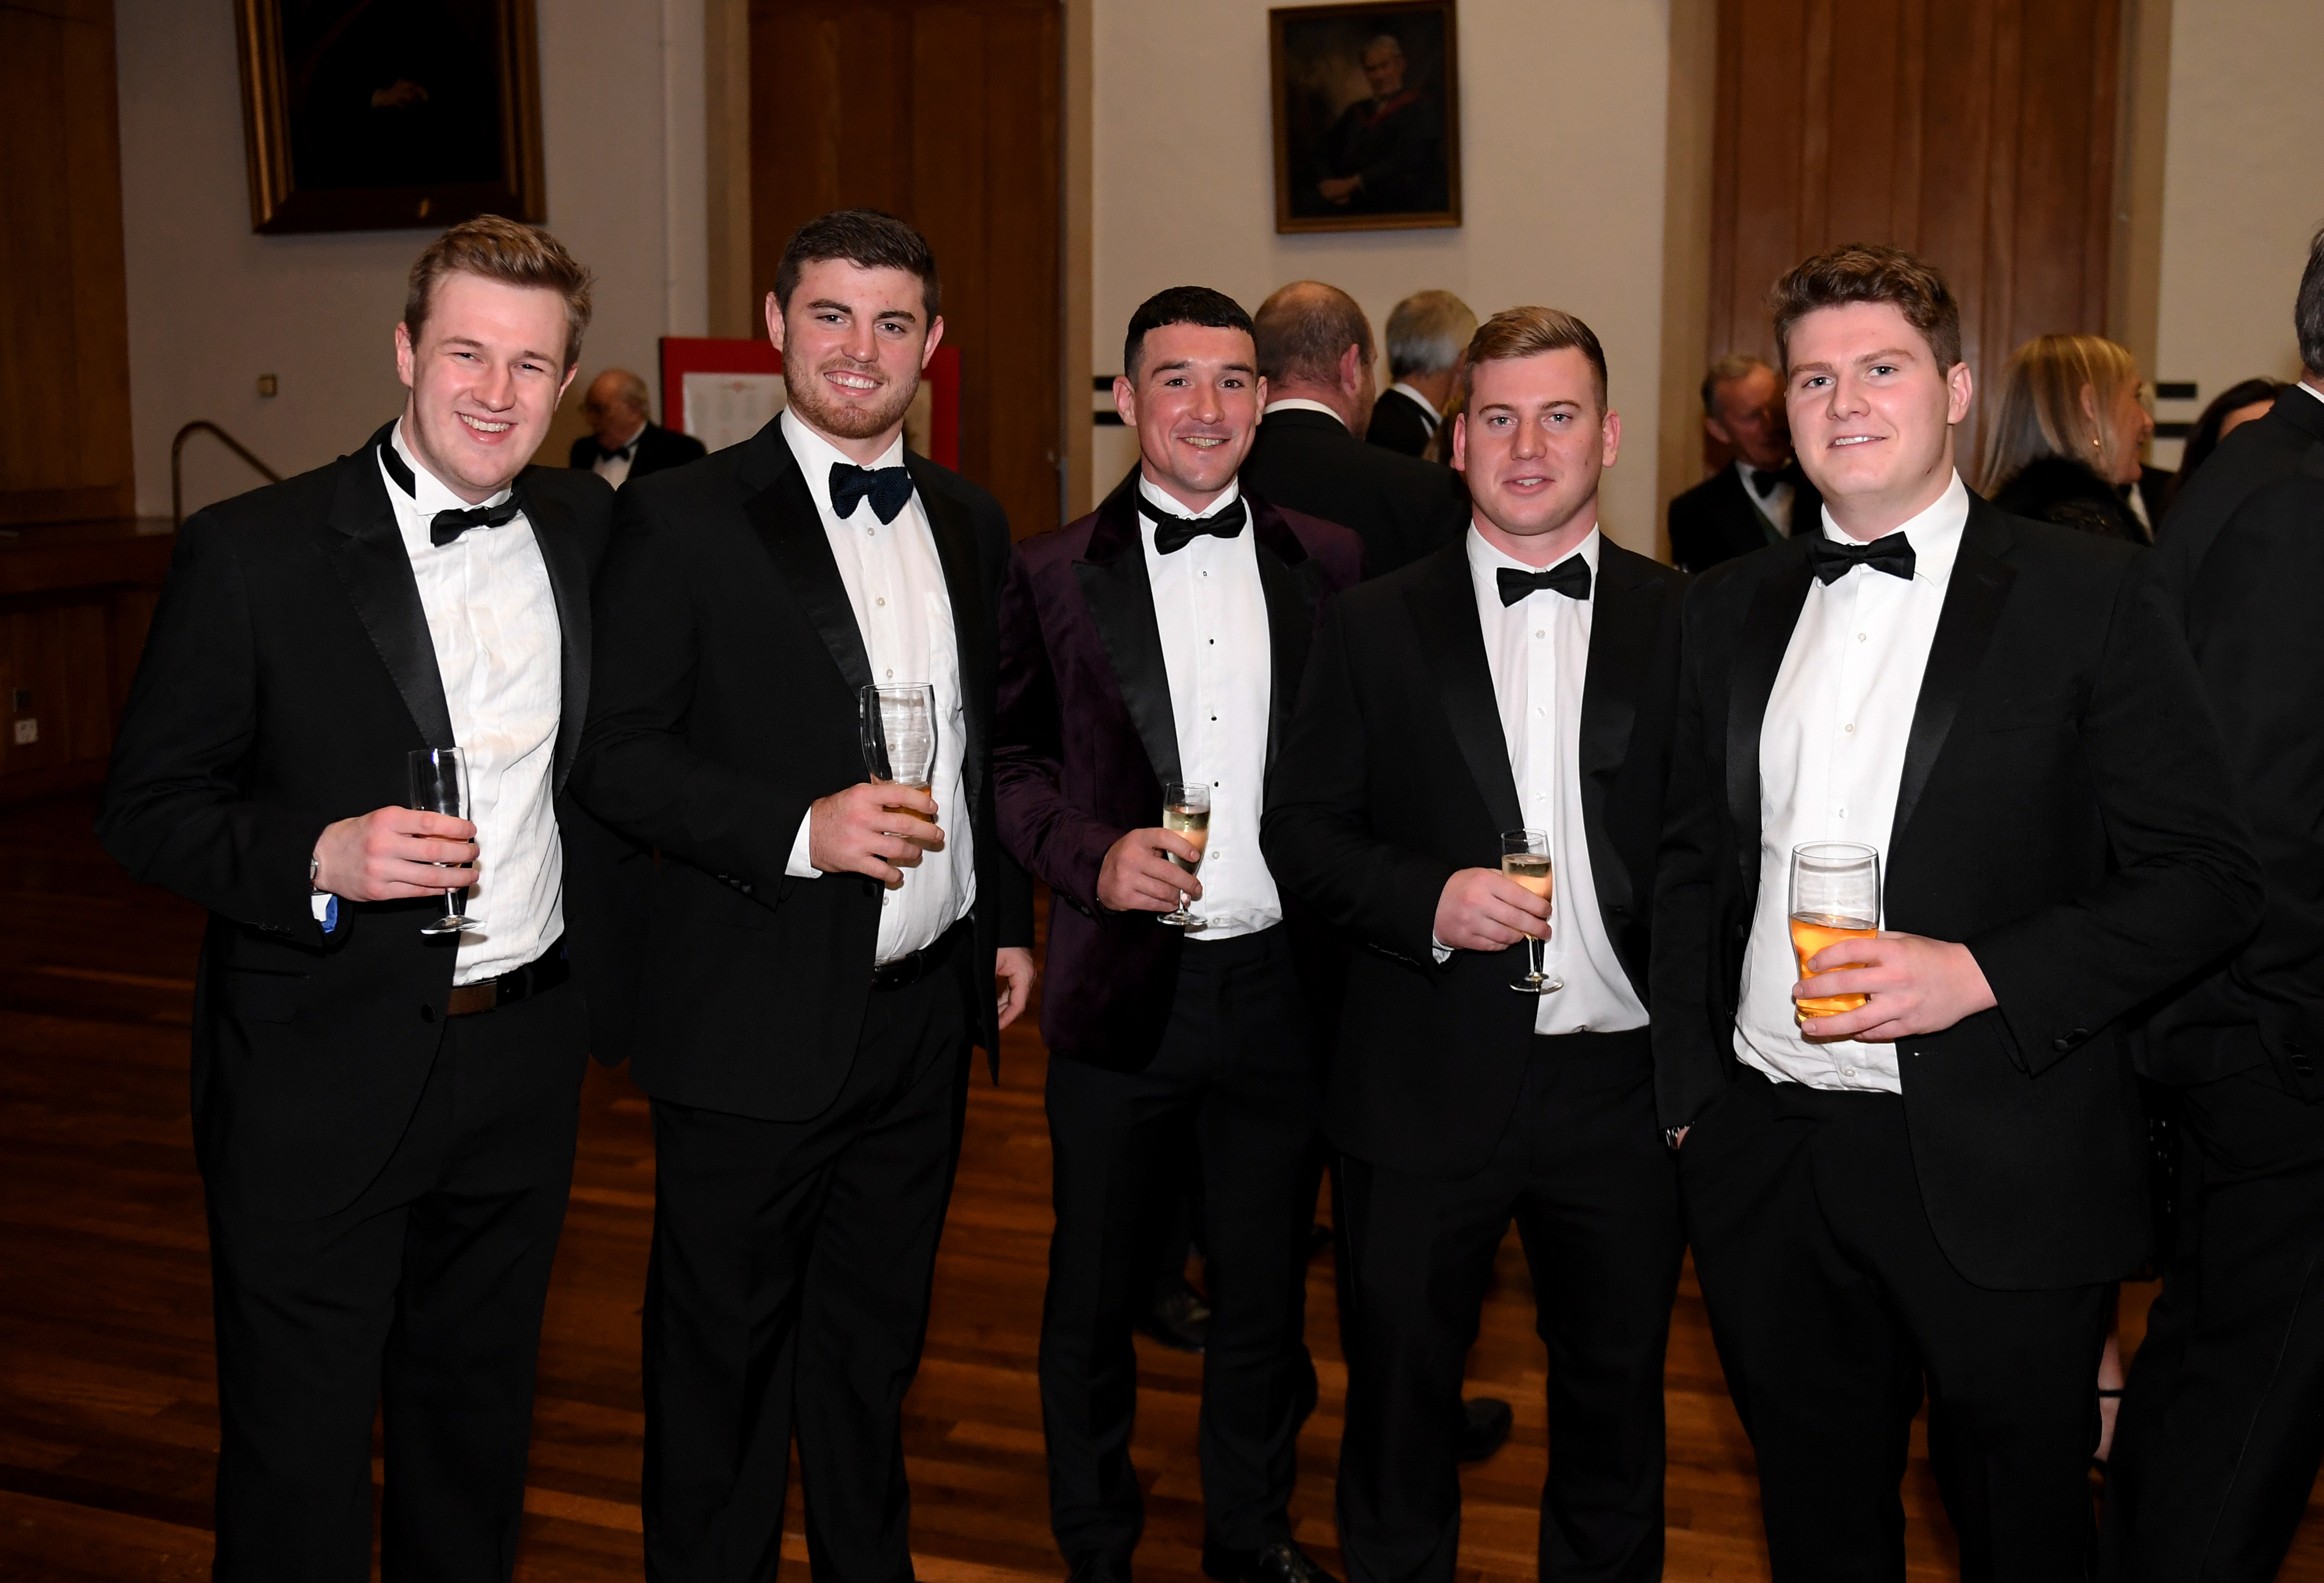 Rugby Dinner, 2018